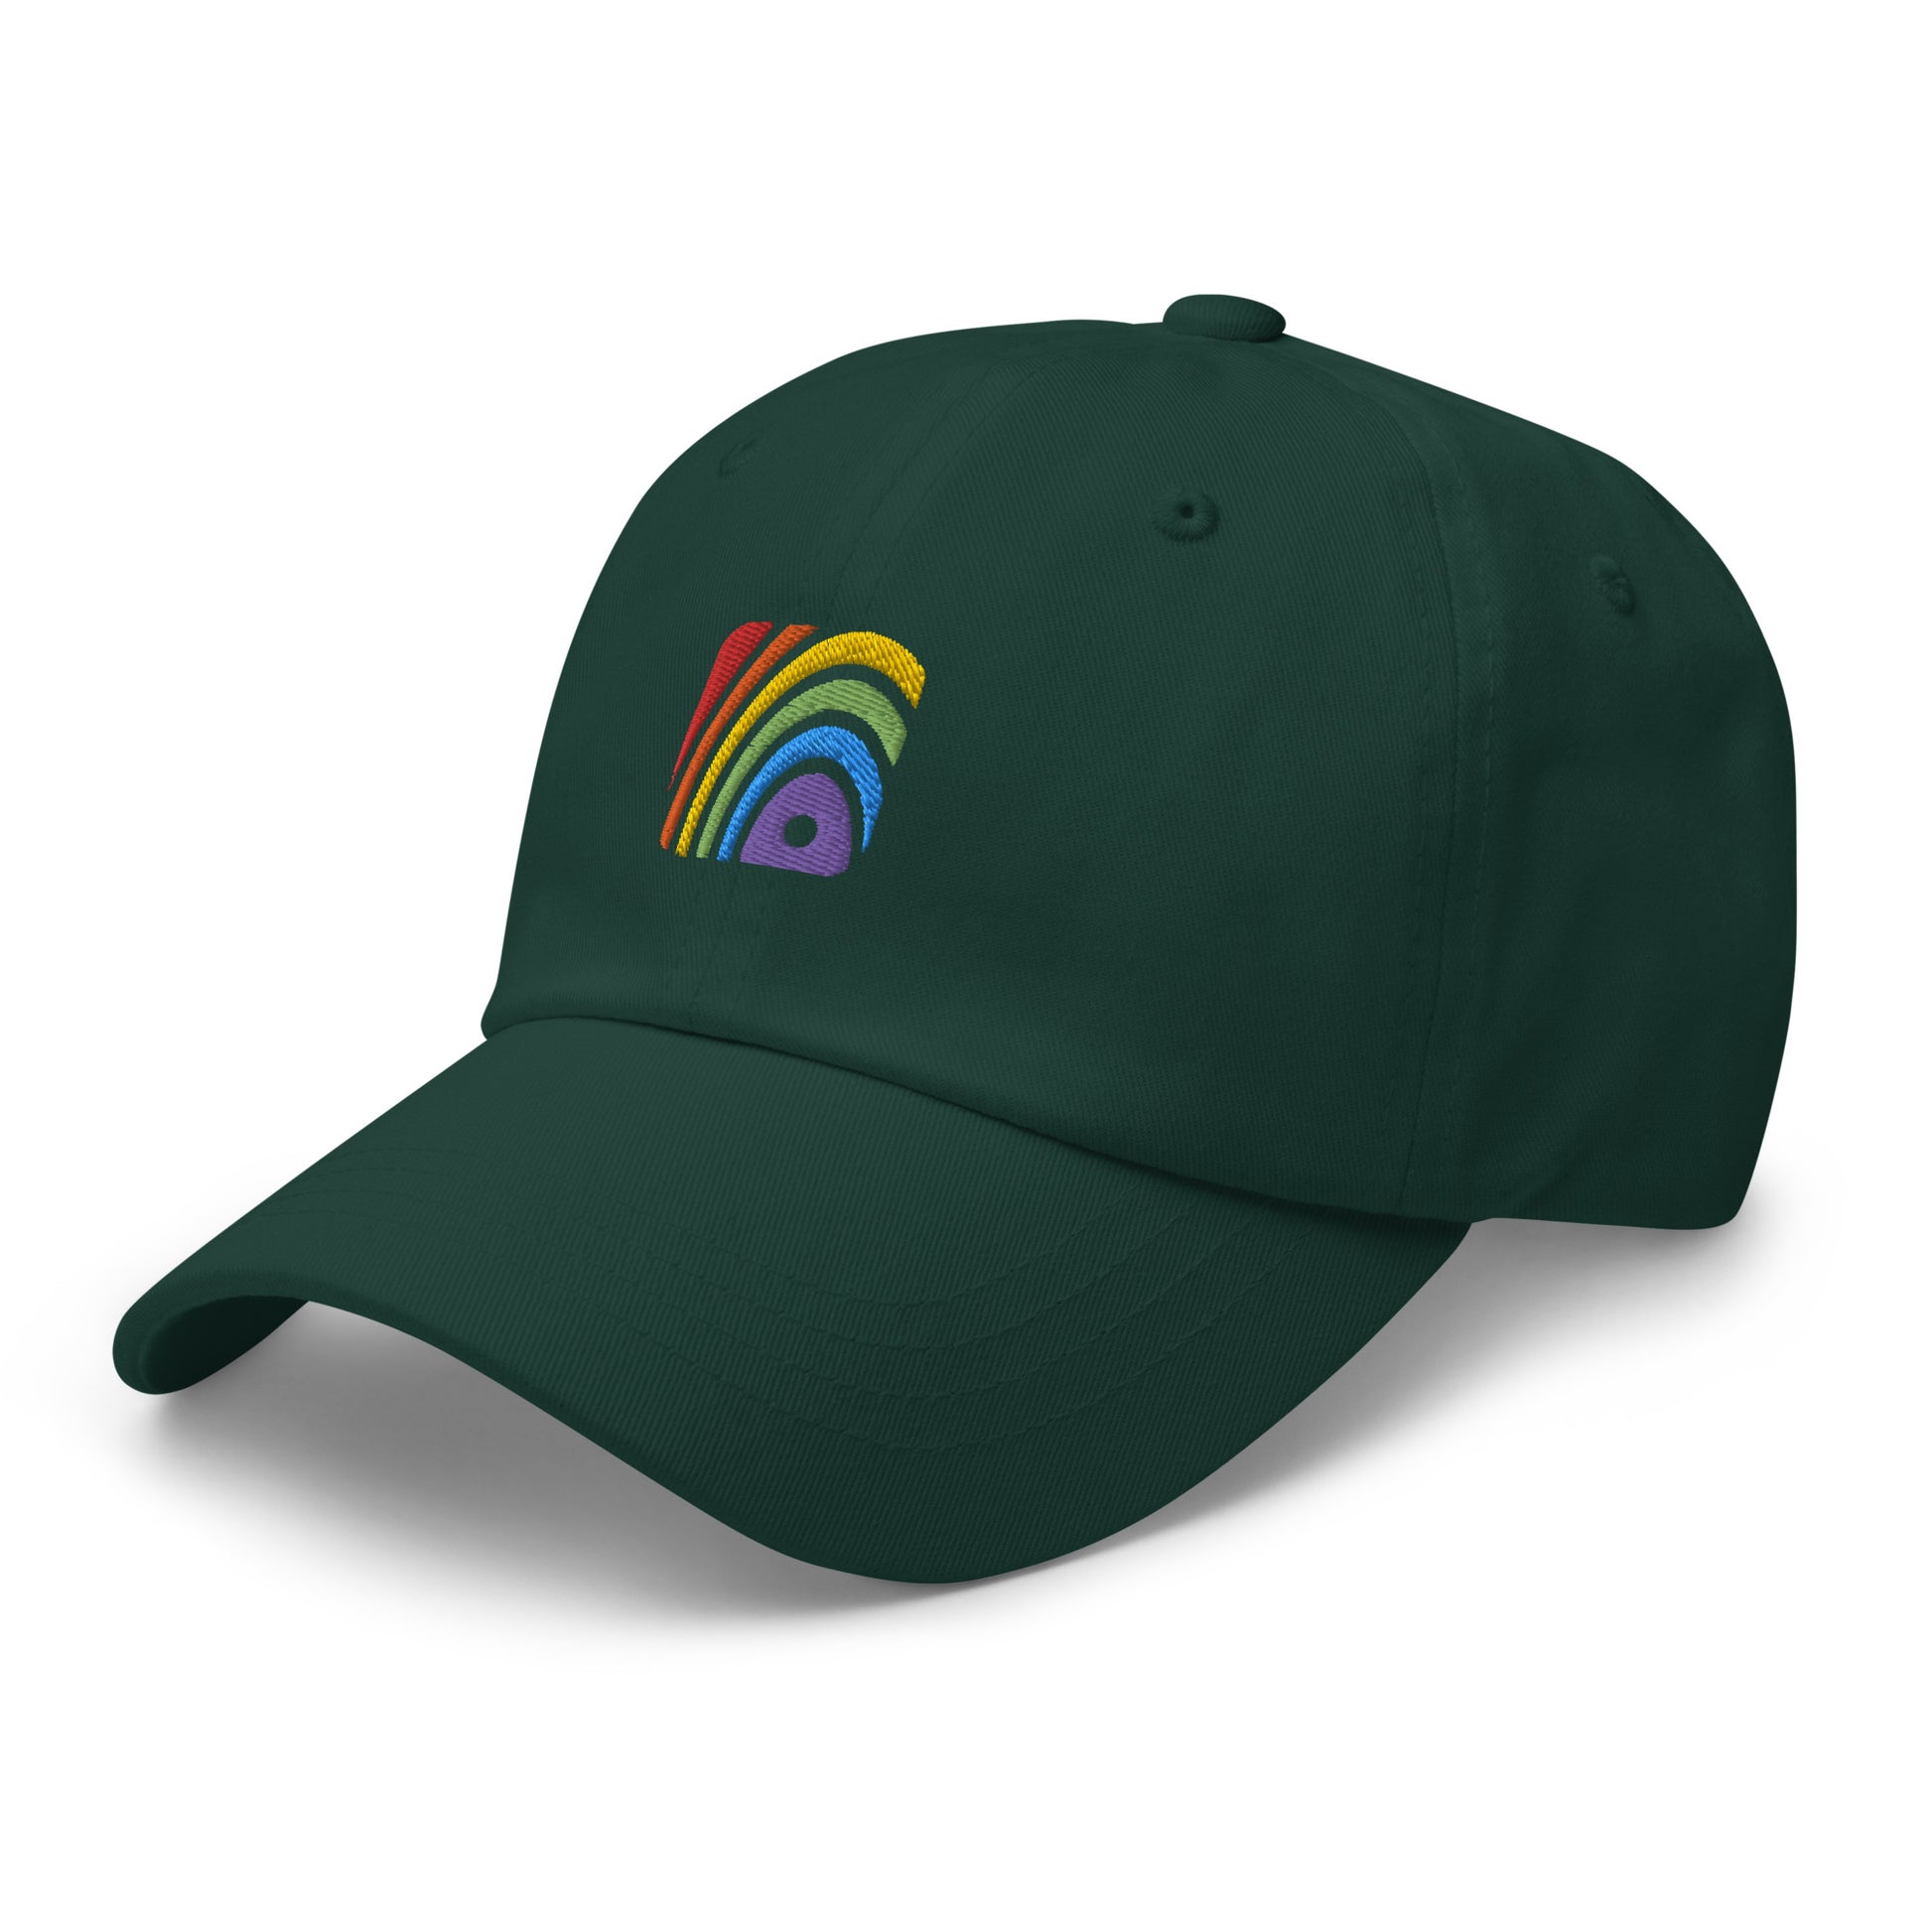 Spruce baseball hat featuring rainbow design embroidery with a low profile, adjustable strap.